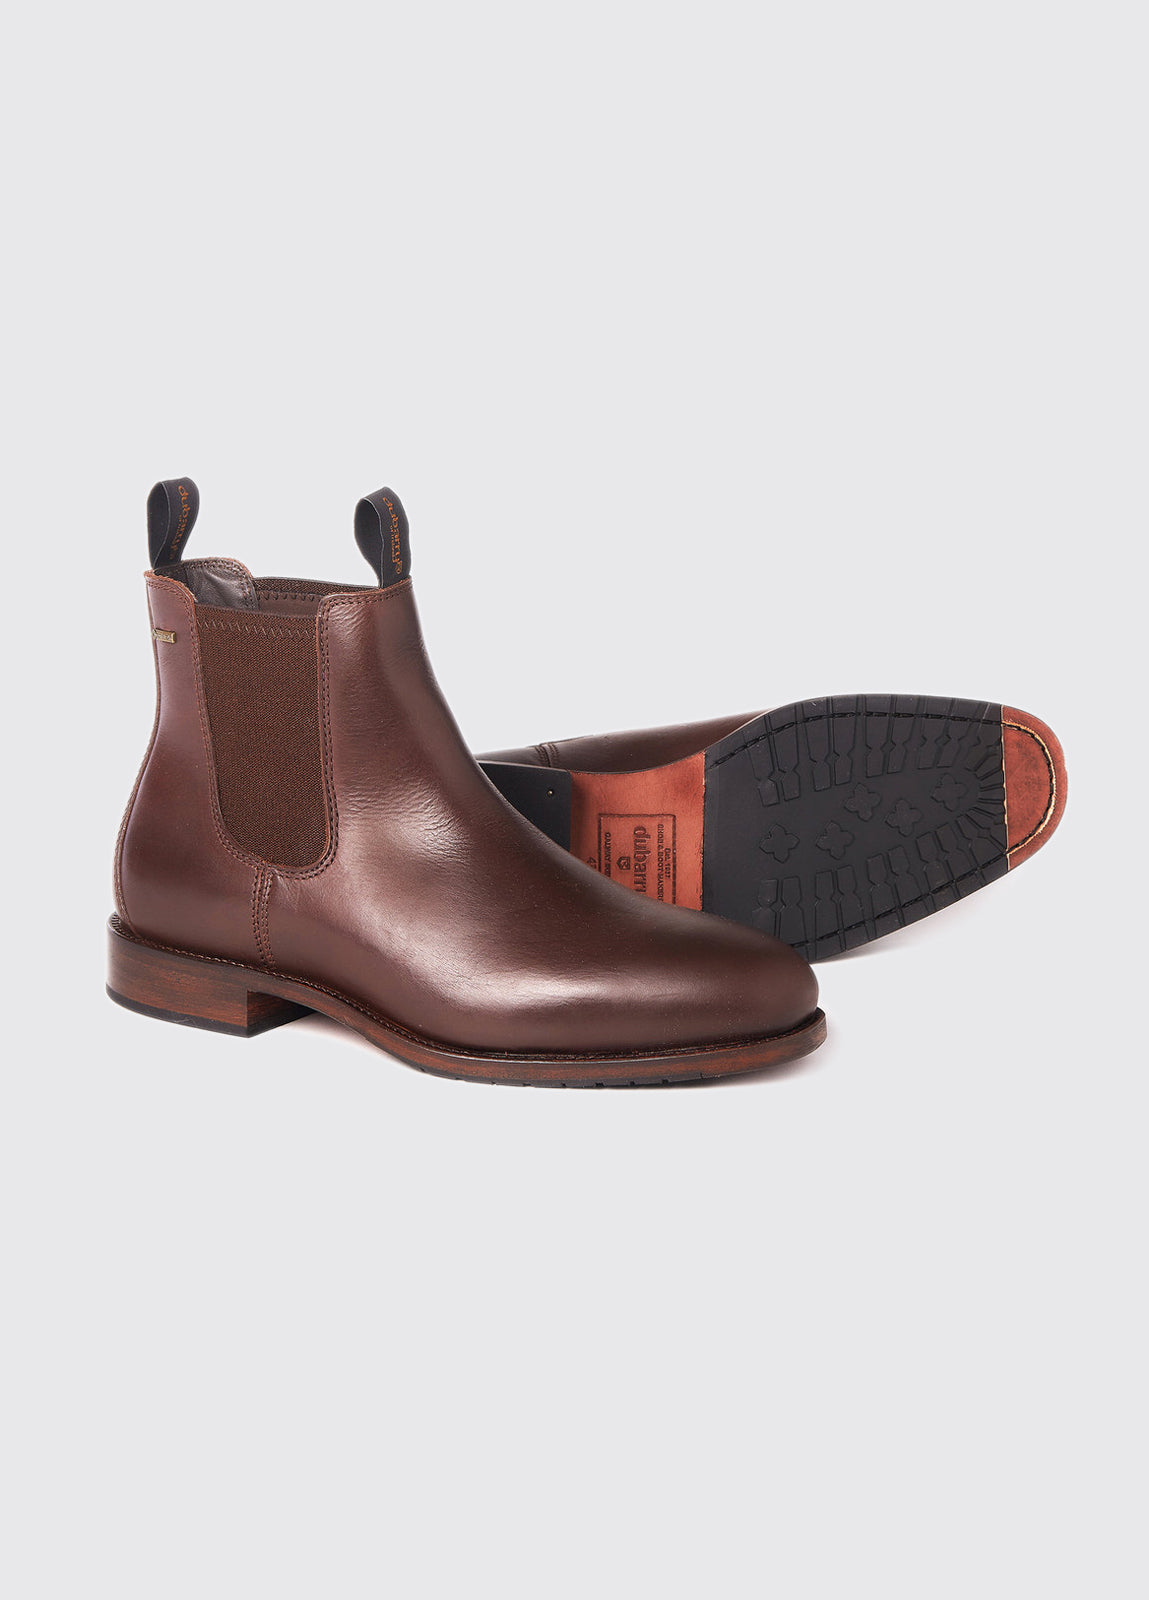 Dubarry Kerry Leather Soled Boot